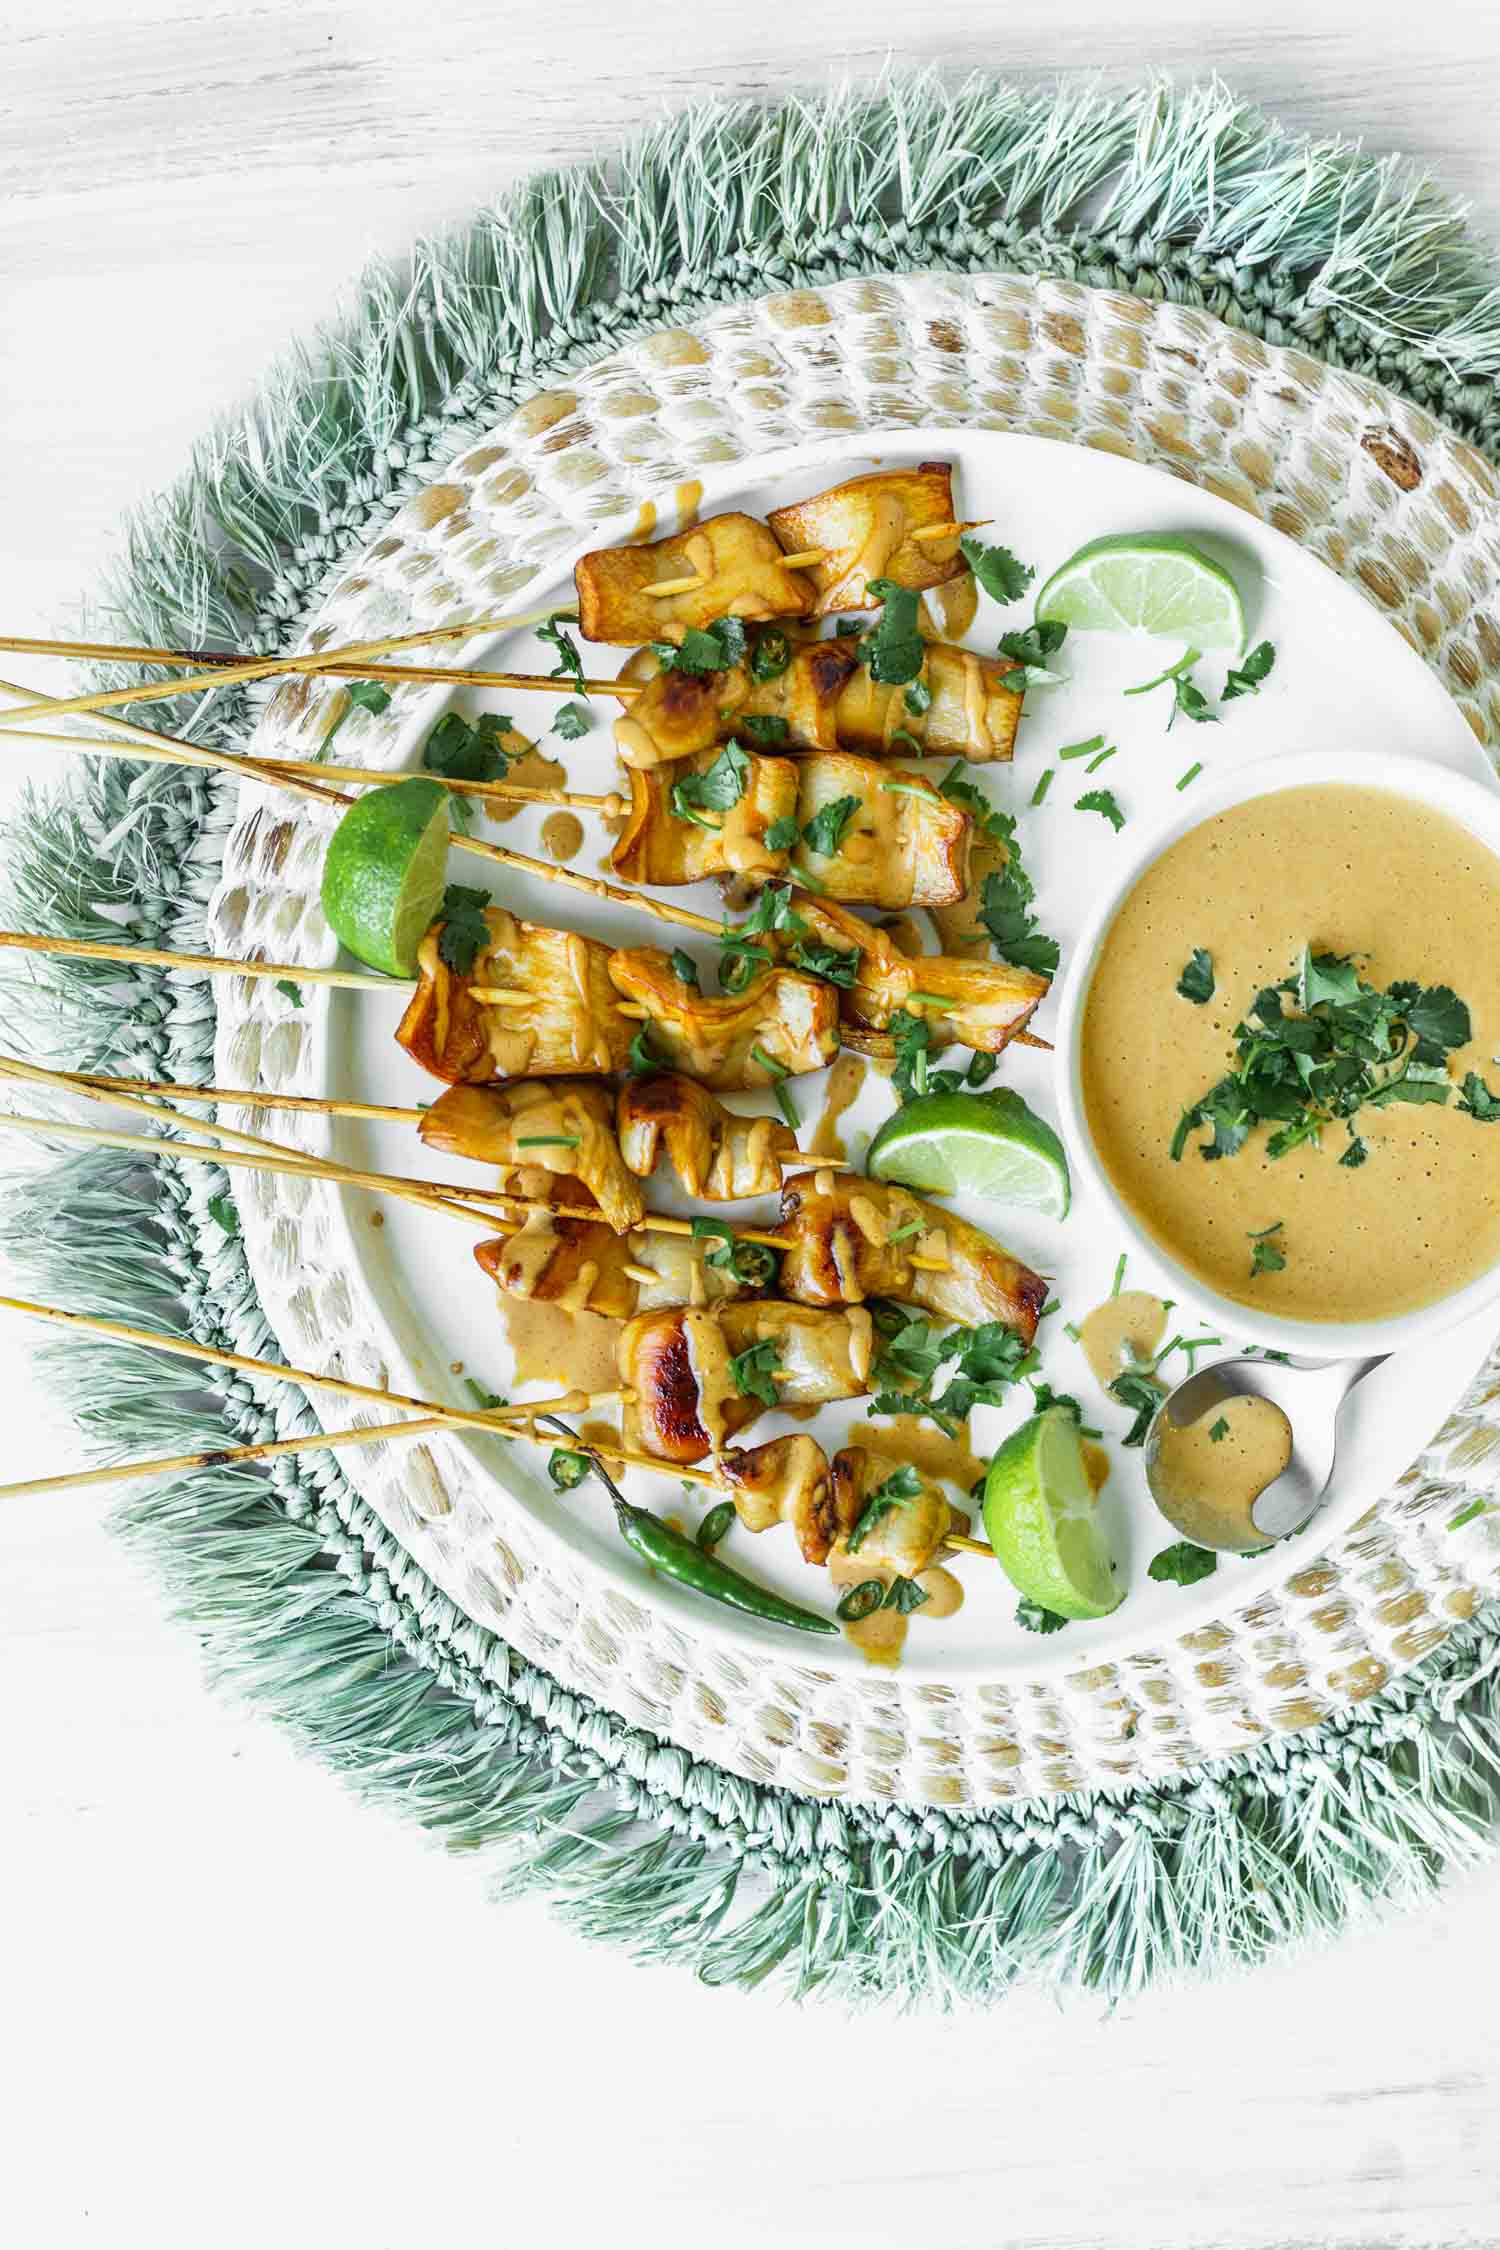 Vegan King Satay with Spicy Peanut-Ginger Sauce Recipe from The Wicked Healthy Cookbook. Photo by Kari of Beautiful Ingredient.